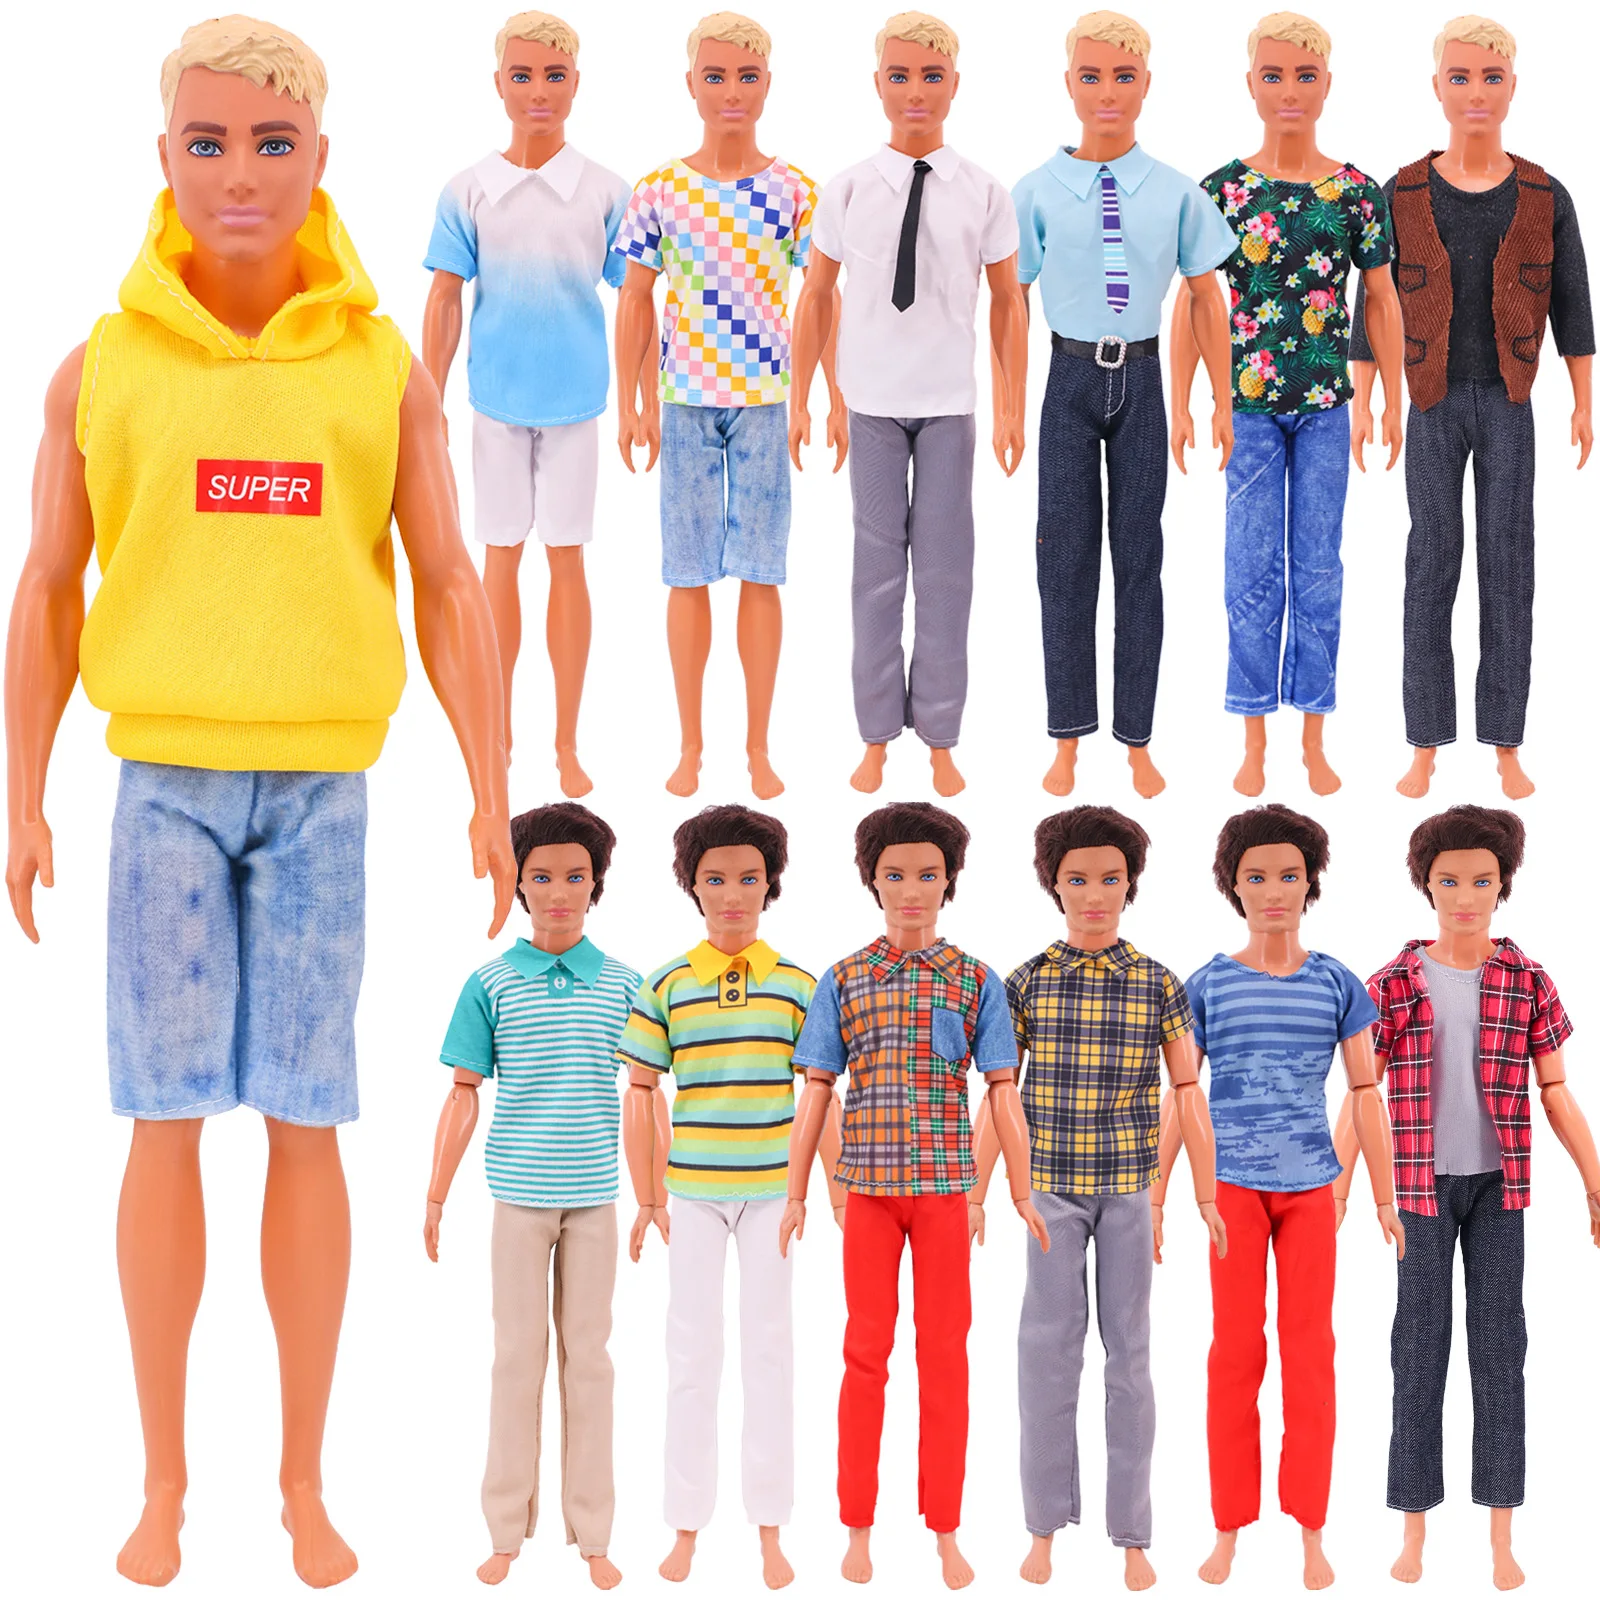 Ken Boy Doll Clothes Handmade Hoodie Shirt Short Sleeve Trousers Fashion Summer New Product For 11.8 Inch Boy Dolls Children Toy